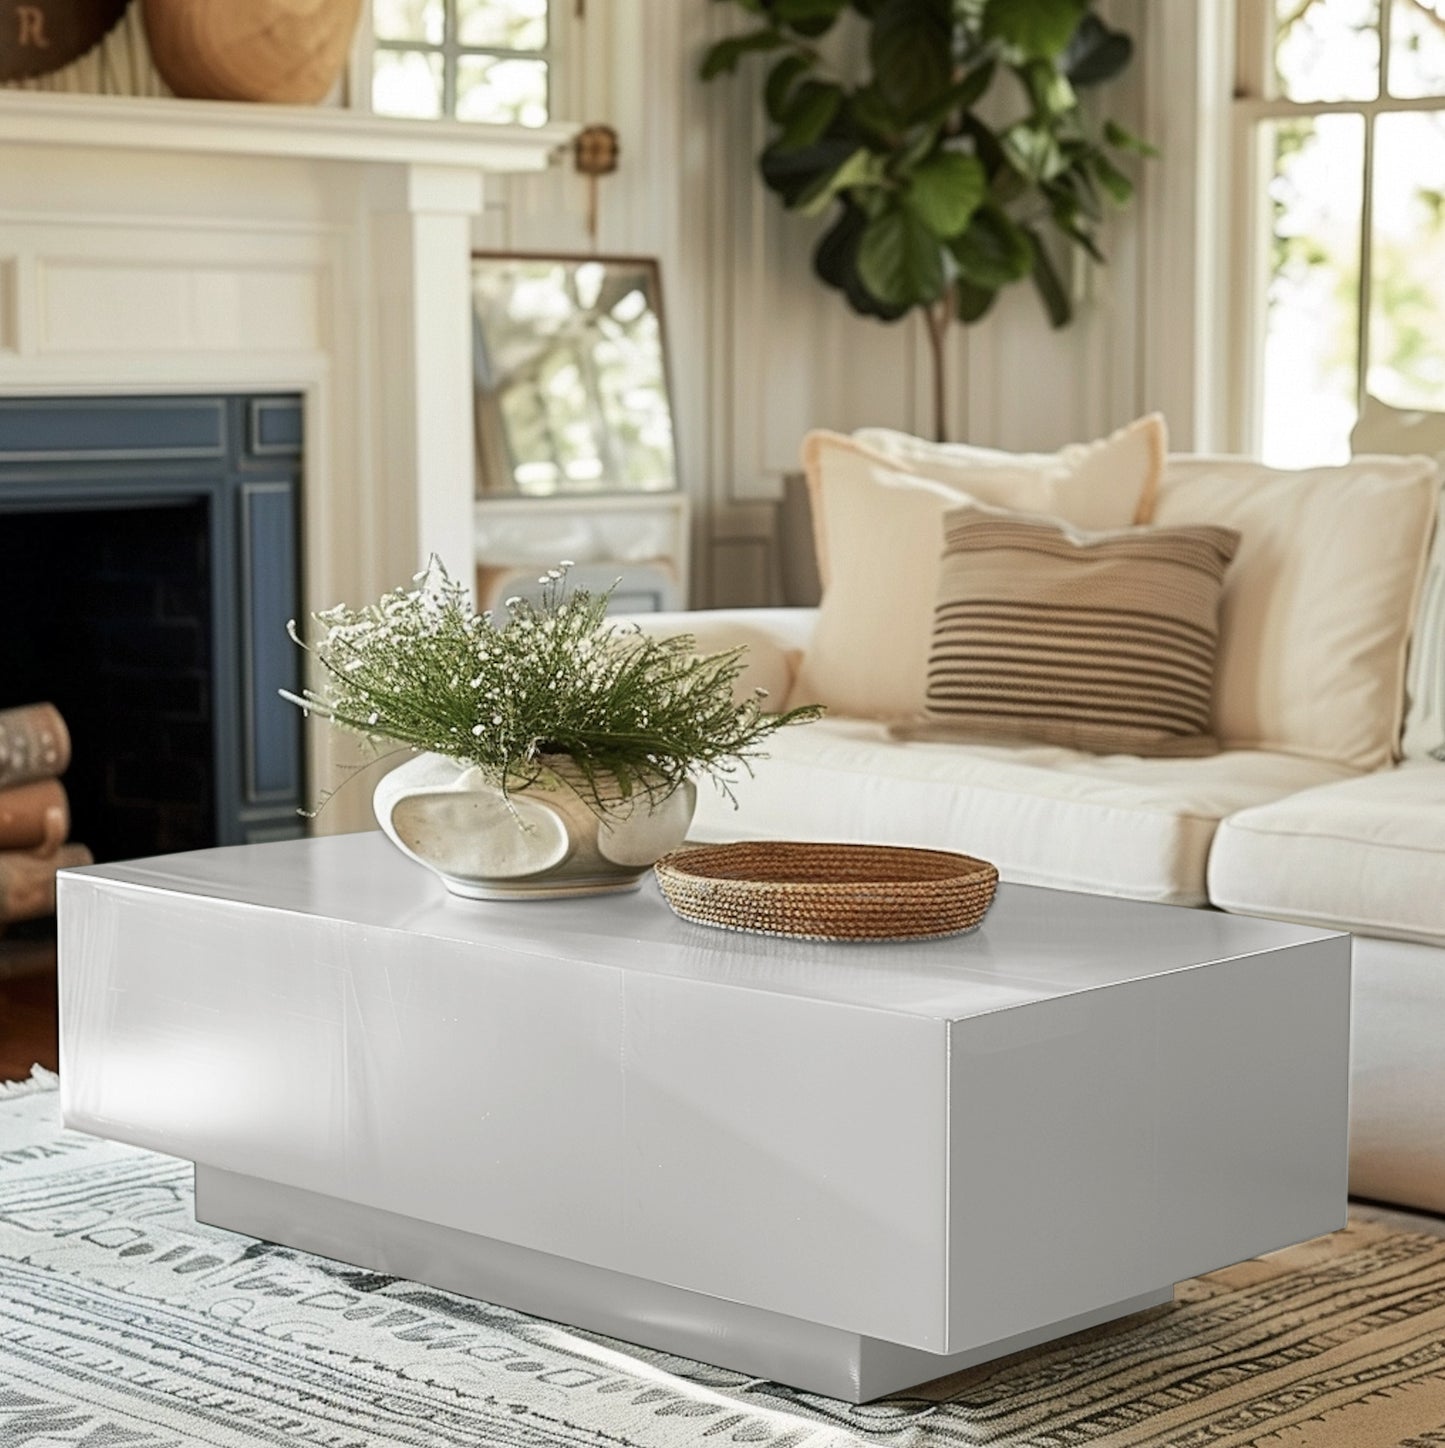 Long power coated rectangular steel coffee table thick gauge high quality welded in America USA made craftsman bespoke in the living room of a modern farmhouse. Metal coffee table and white washed brick house